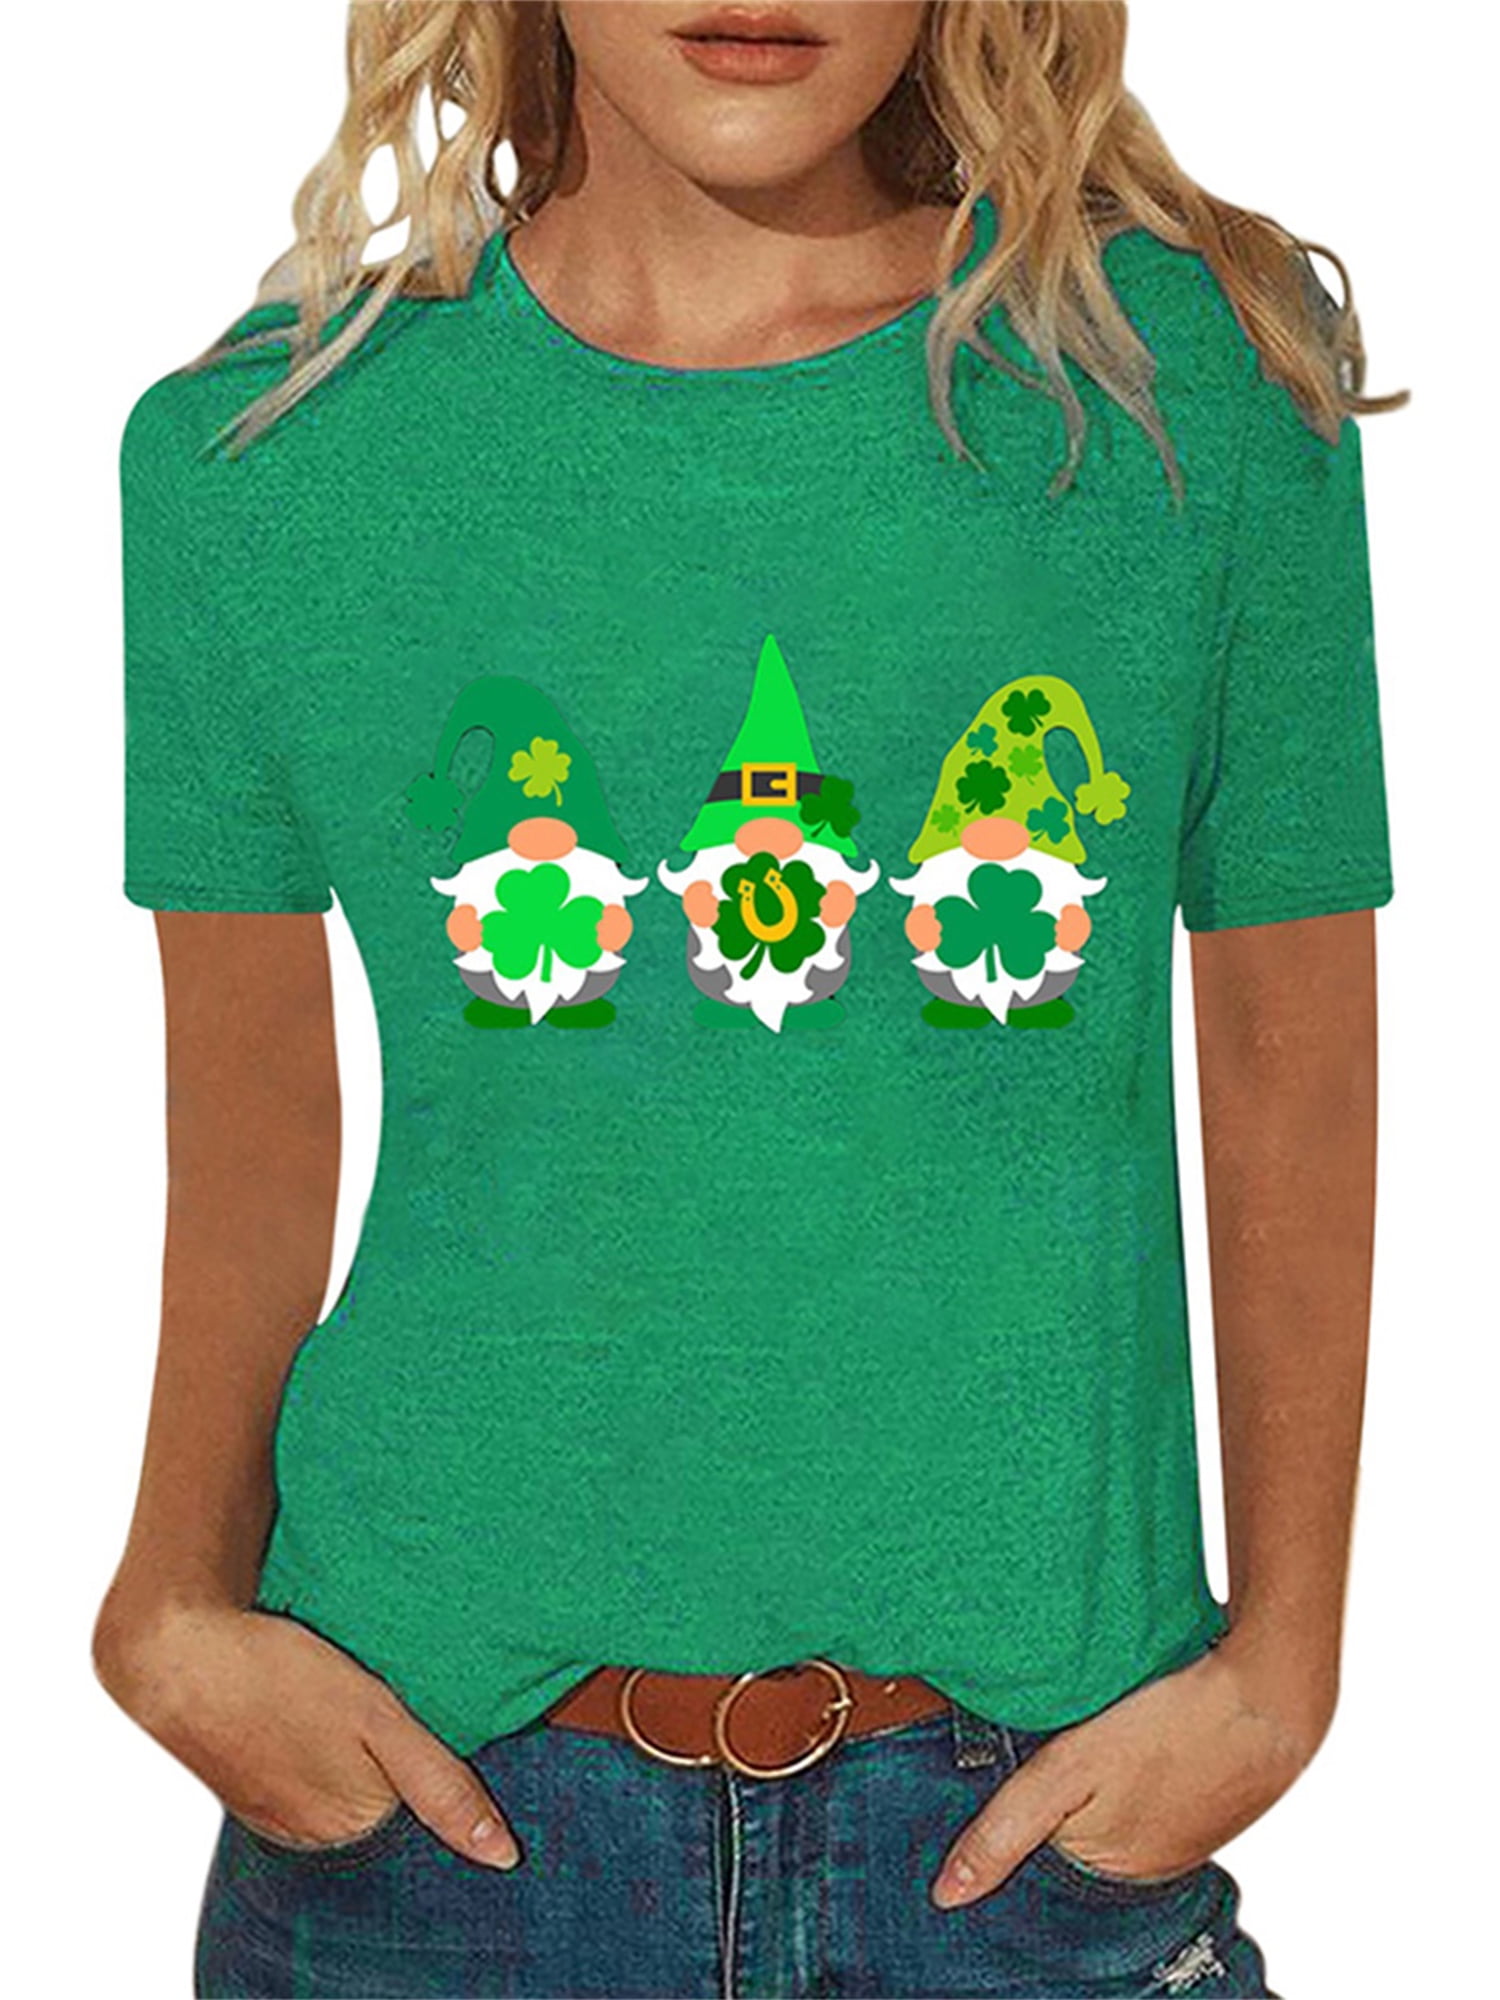 Aniywn Women's St Patricks Day Casual Short Sleeve T-Shirt Round Neck Graphic Print Tee Top Blouse 